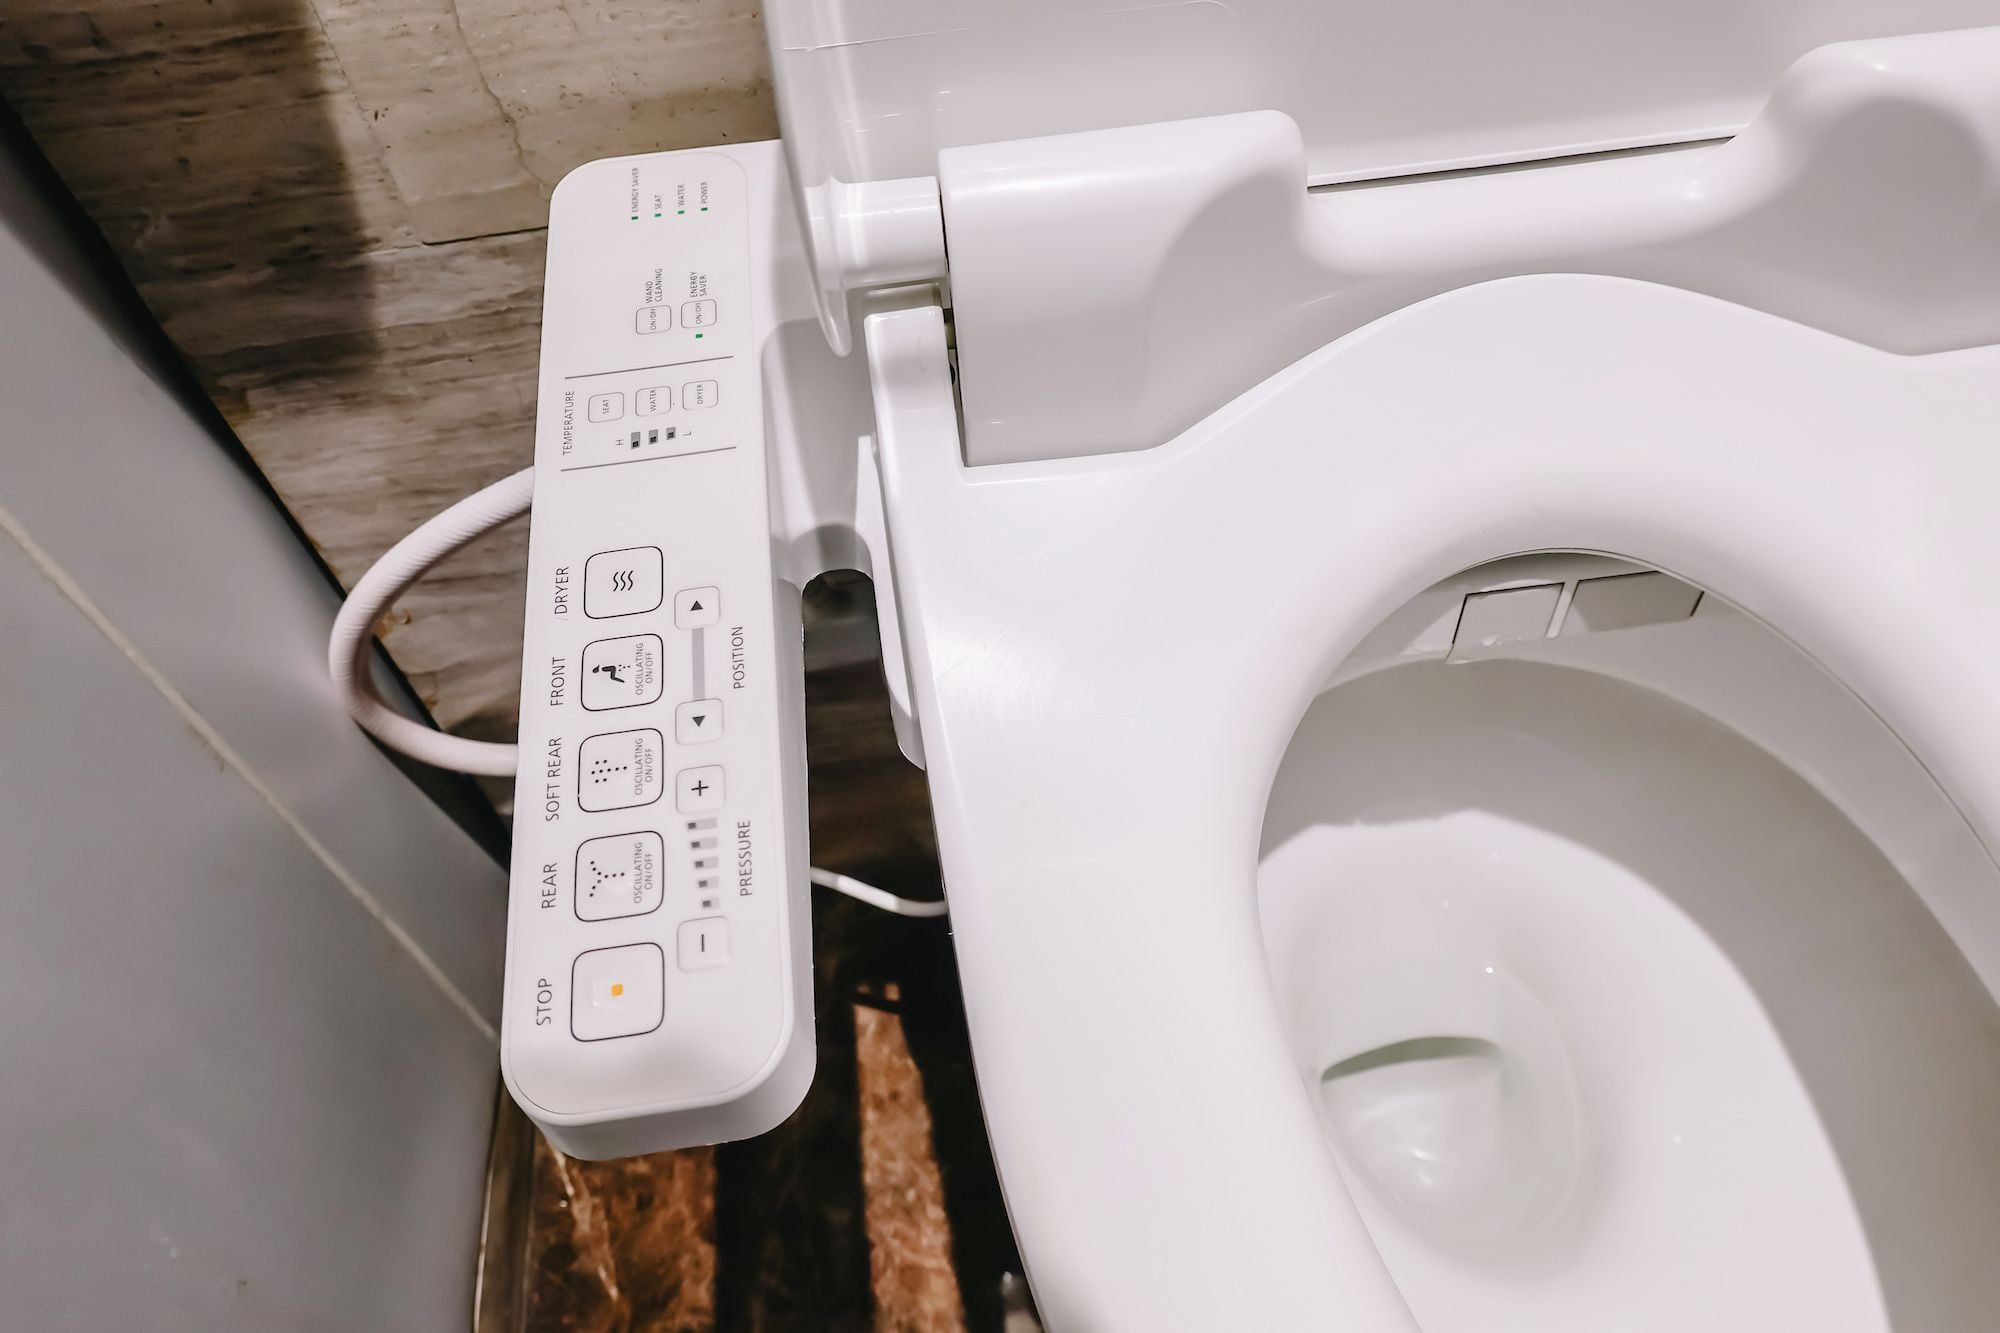 Modern toilets in Europe in Asia are already equipped with high-tech bidets.